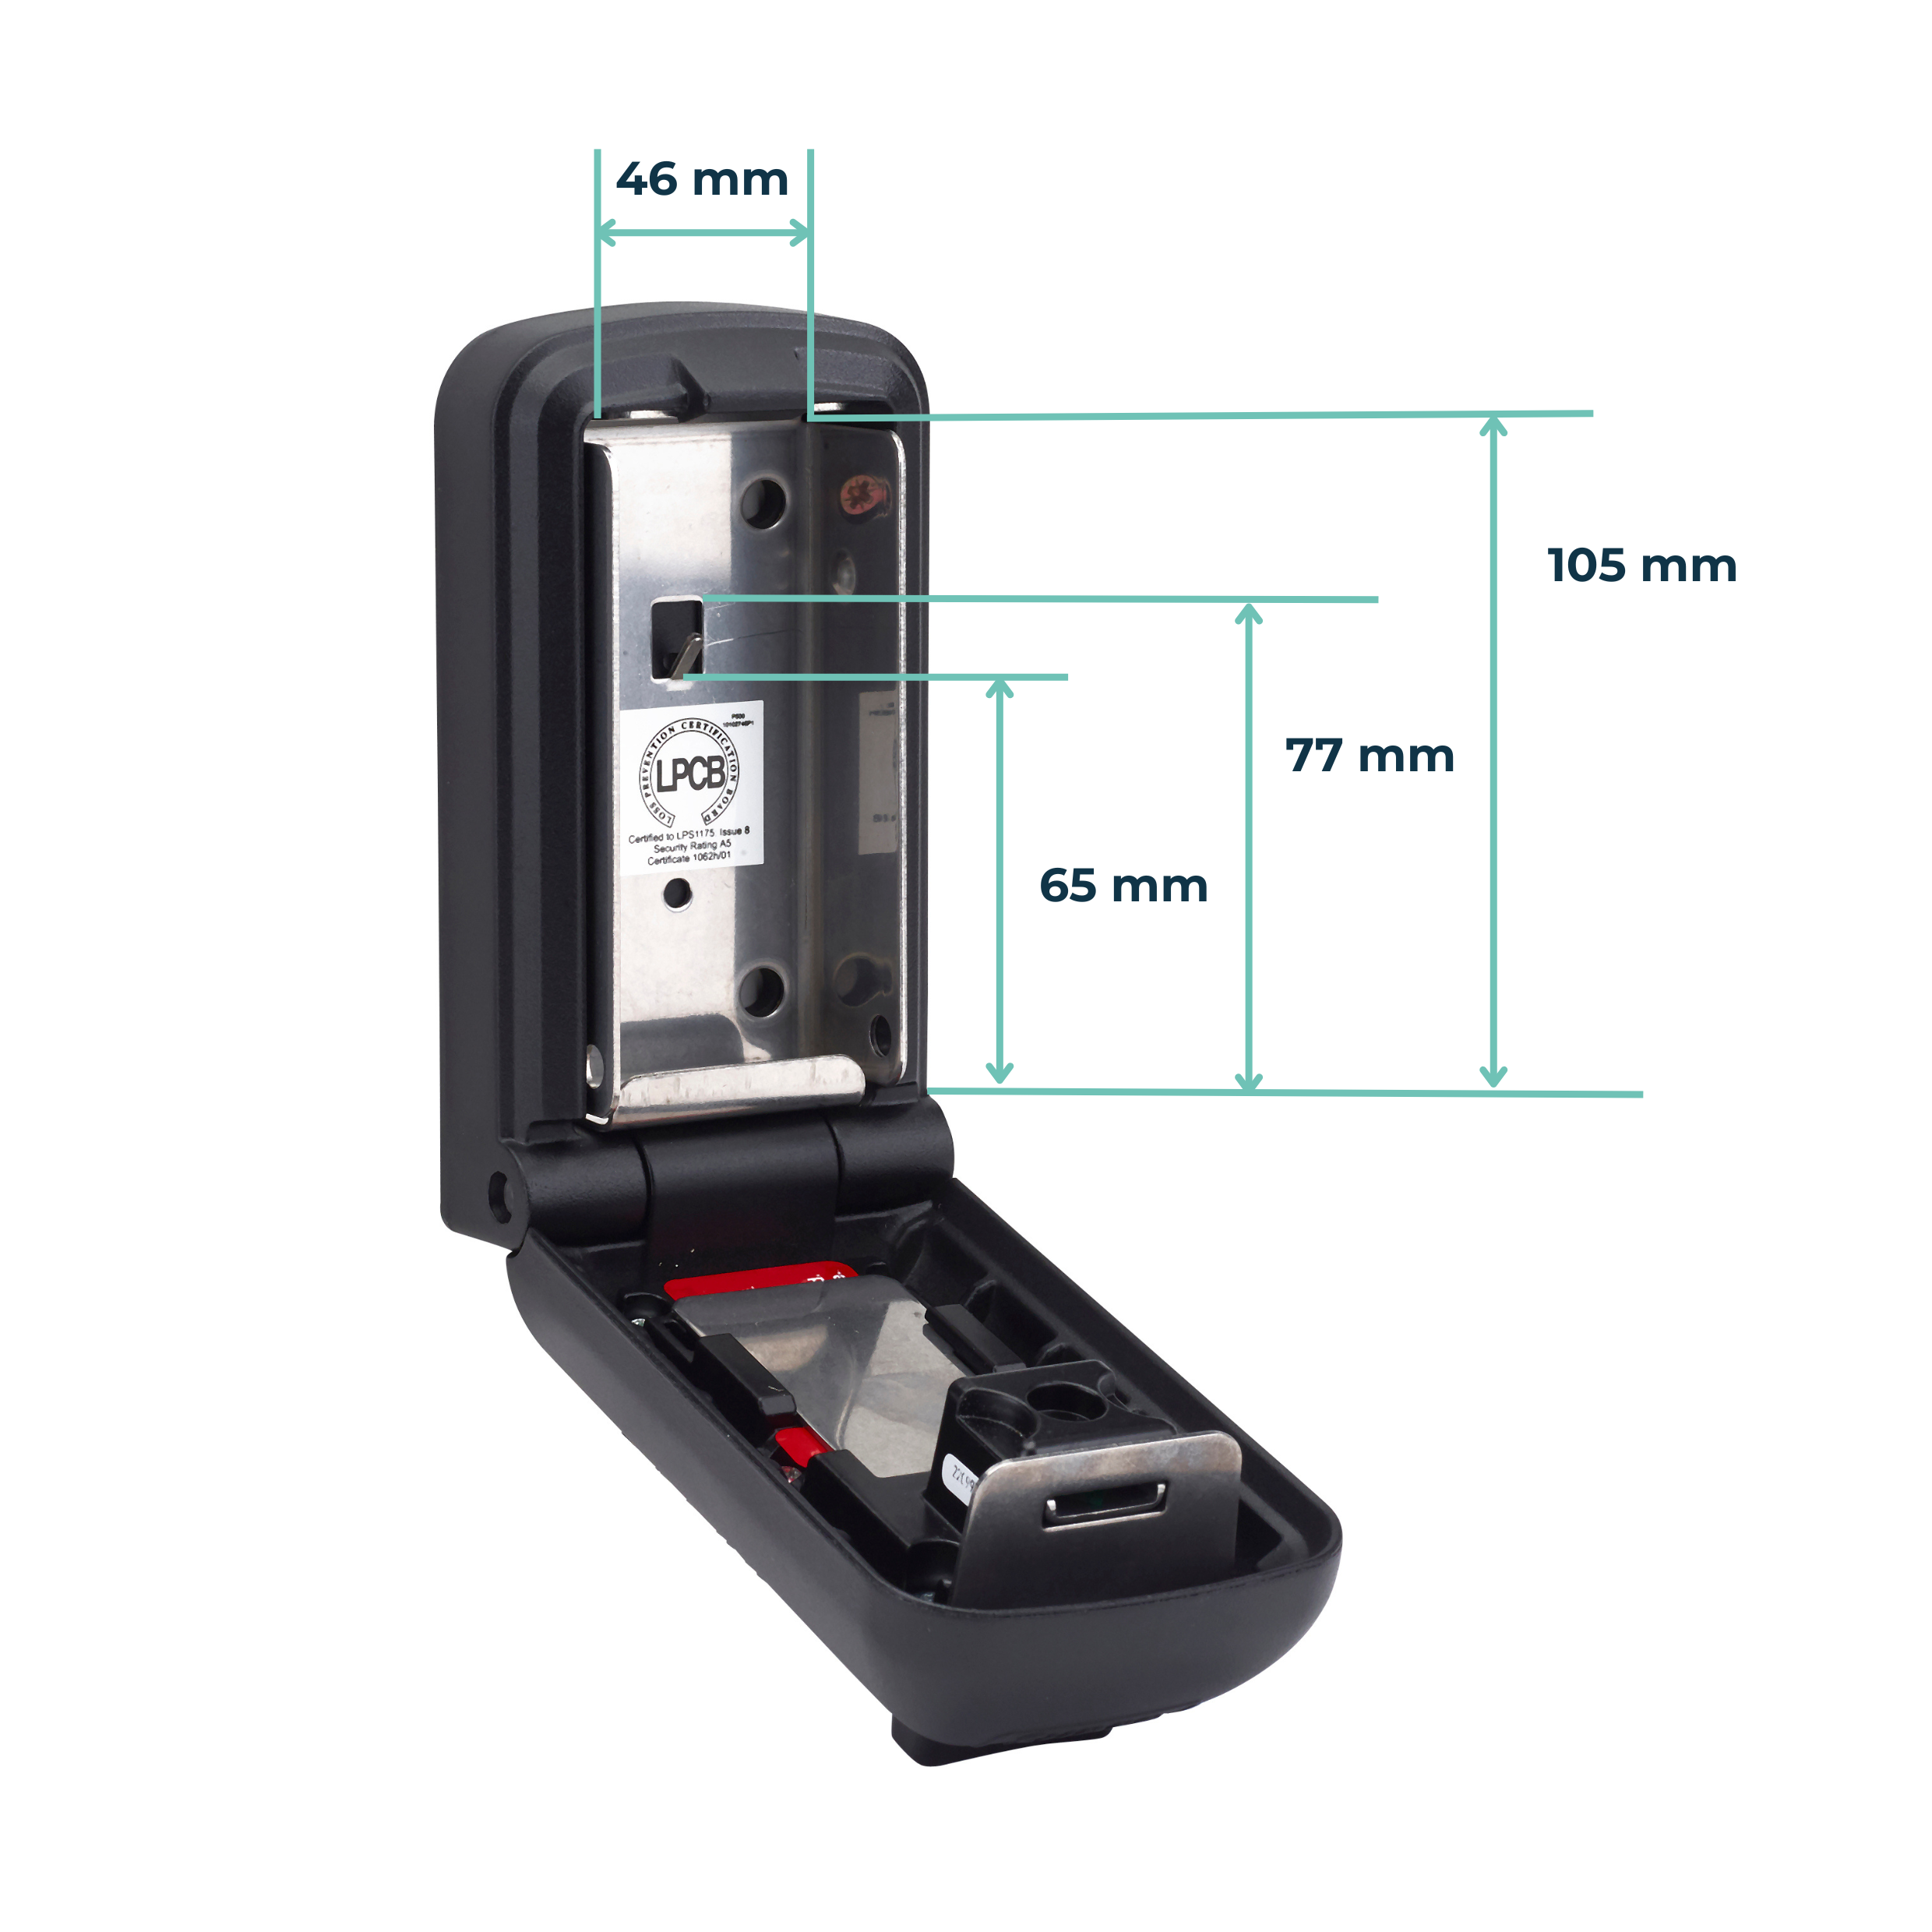 P500 Pro Key Safe with dimensions